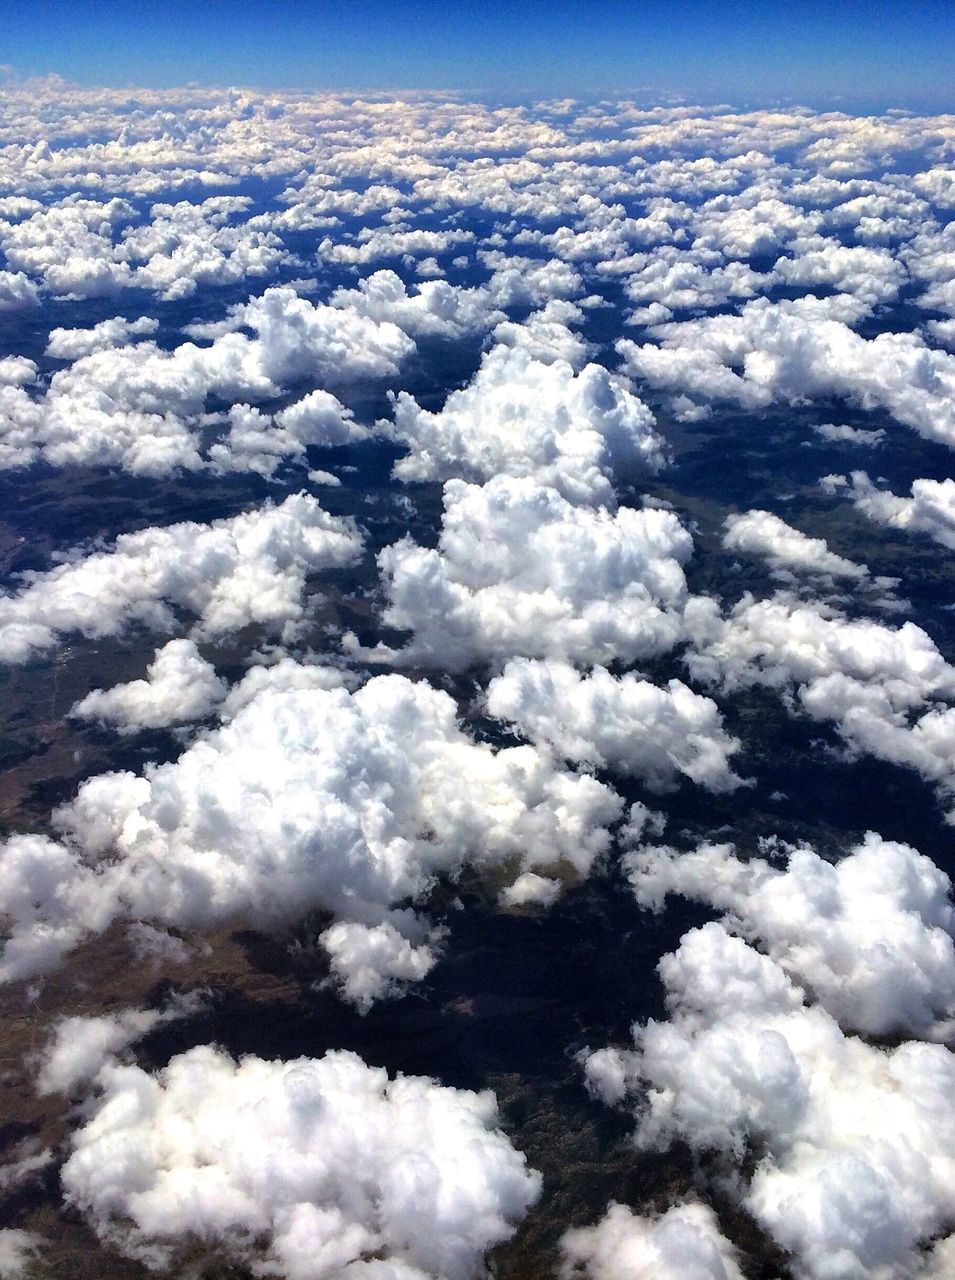 sky, beauty in nature, cloud - sky, cloudscape, scenics, white color, aerial view, nature, tranquil scene, tranquility, sky only, cloud, blue, fluffy, white, cloudy, softness, idyllic, majestic, weather